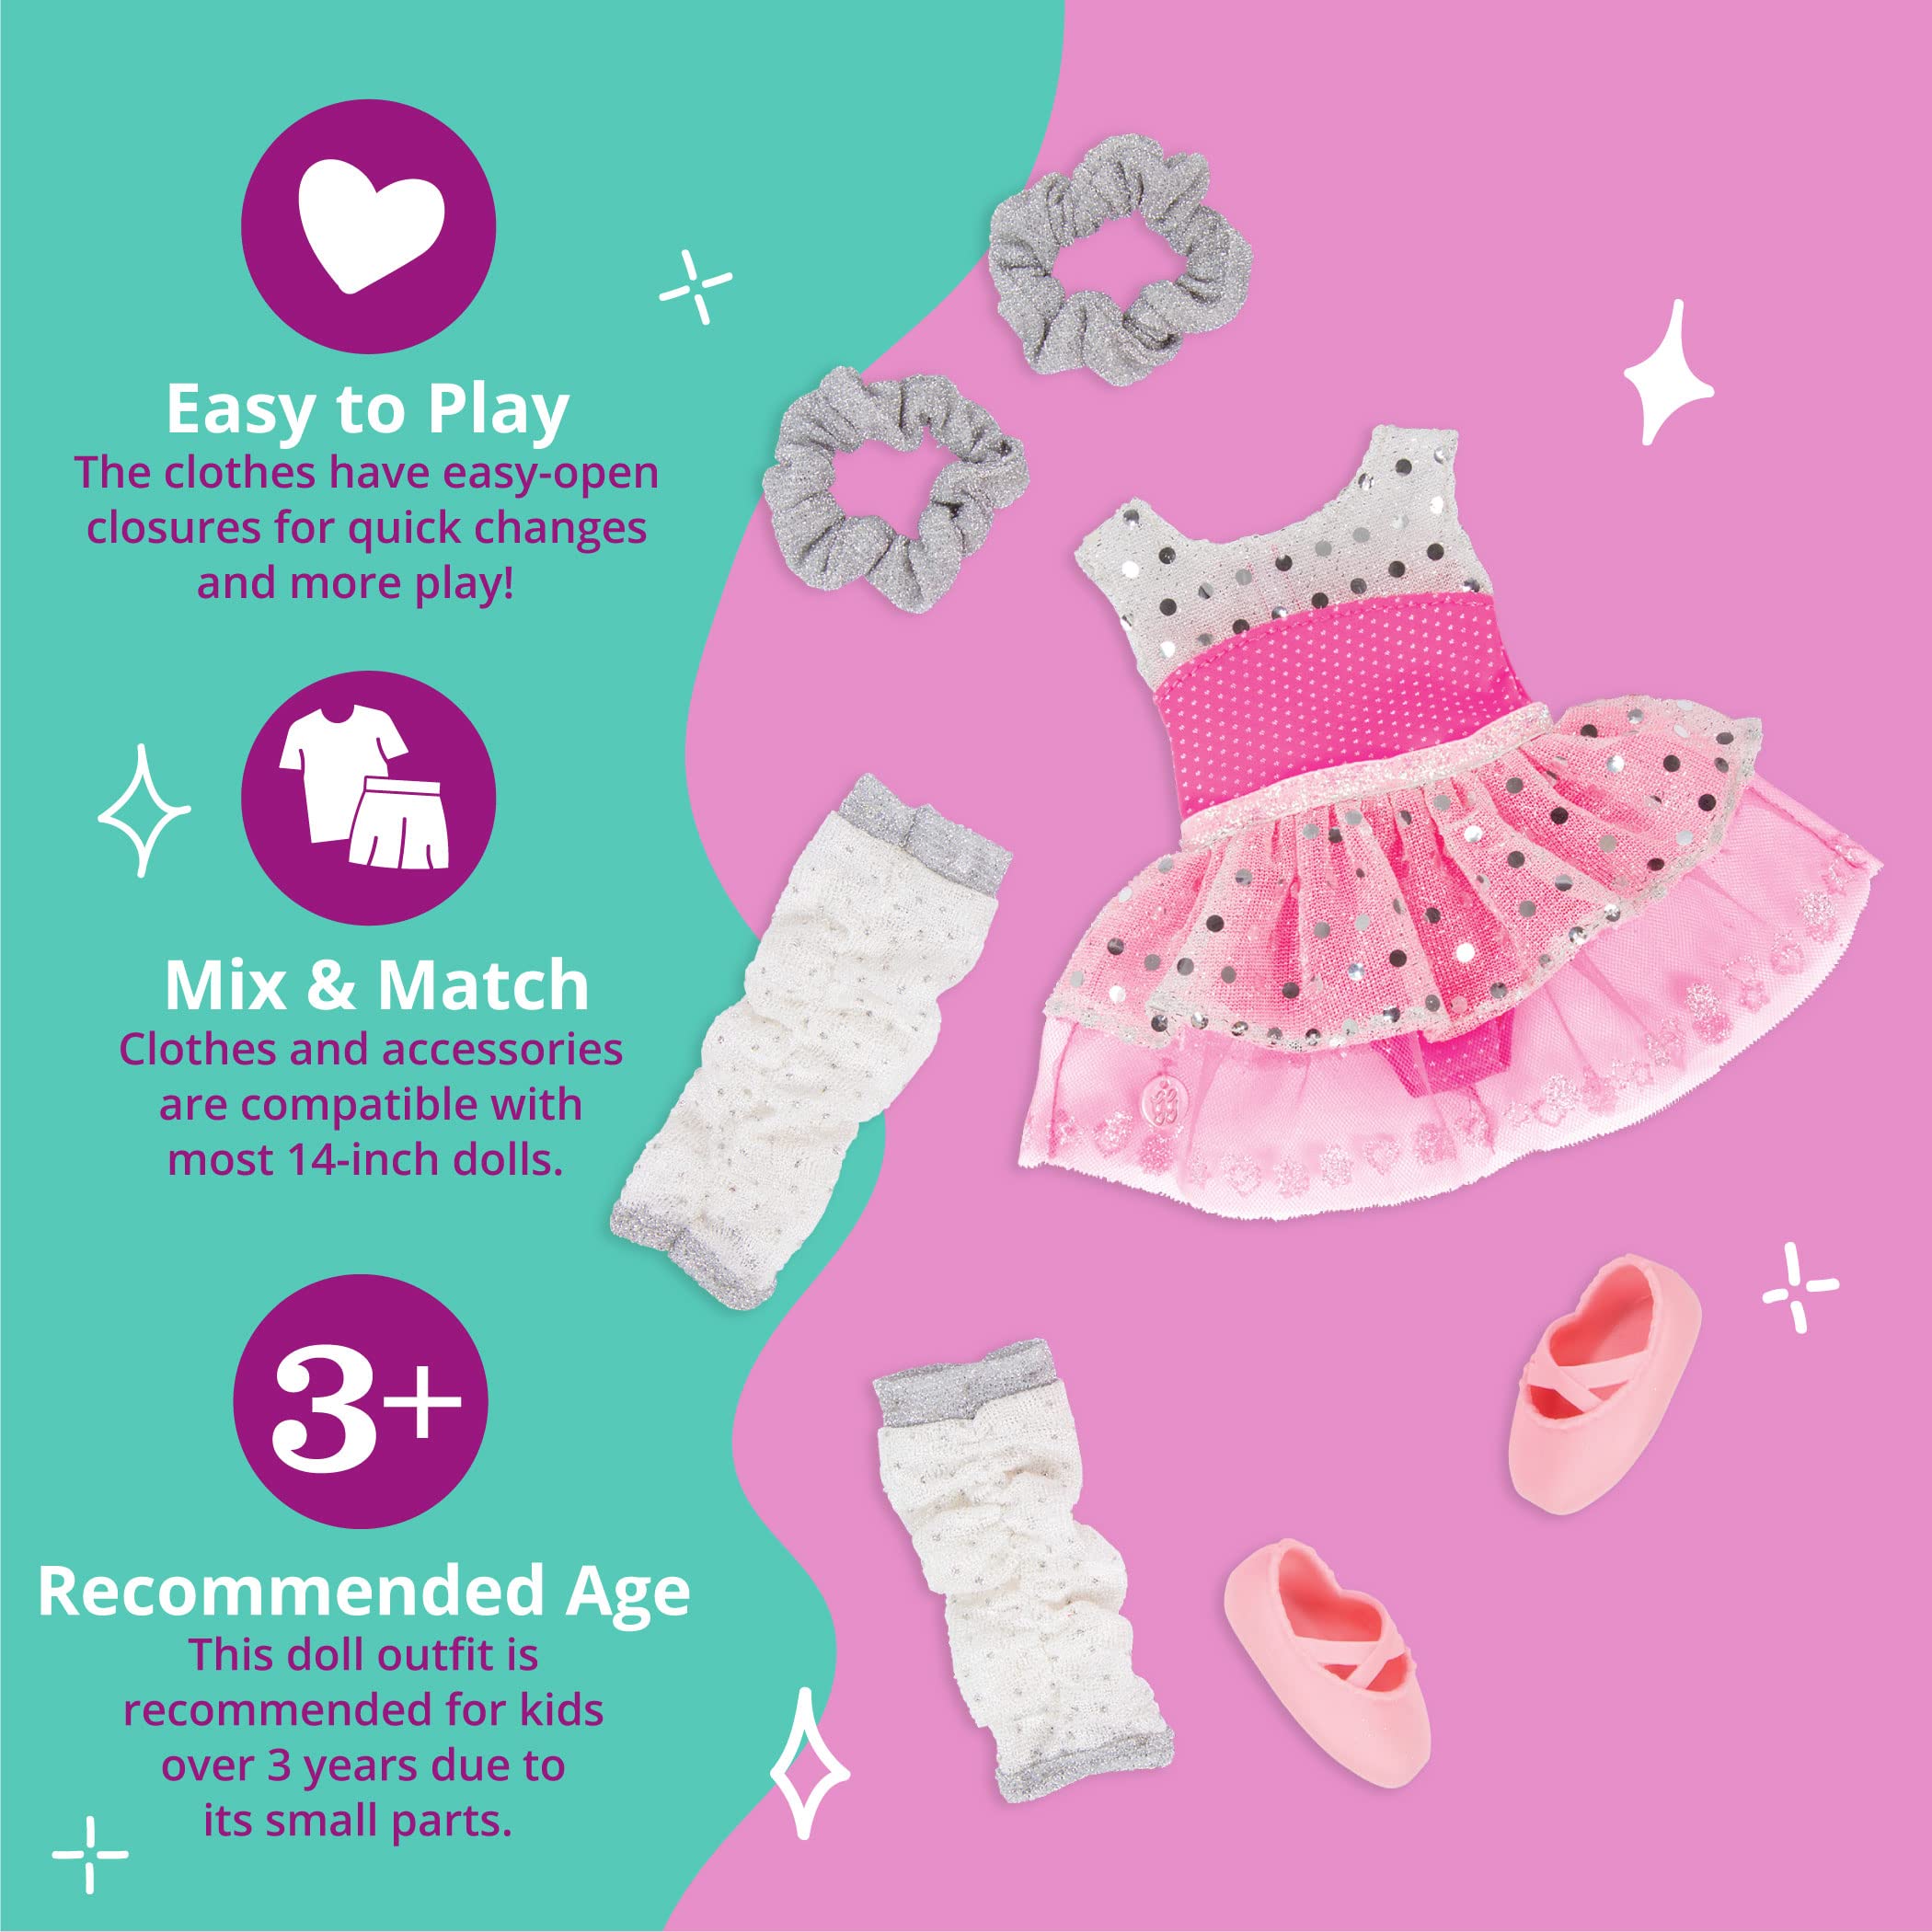 Glitter Girls – Twirls of Joy Ballerina Outfit Hearts & Stars – Ballet Dress, Hair Elastics, Shoes – 14-inch Doll Clothes & Accessories for Kids Ages 3 & Up – Children’s Toys